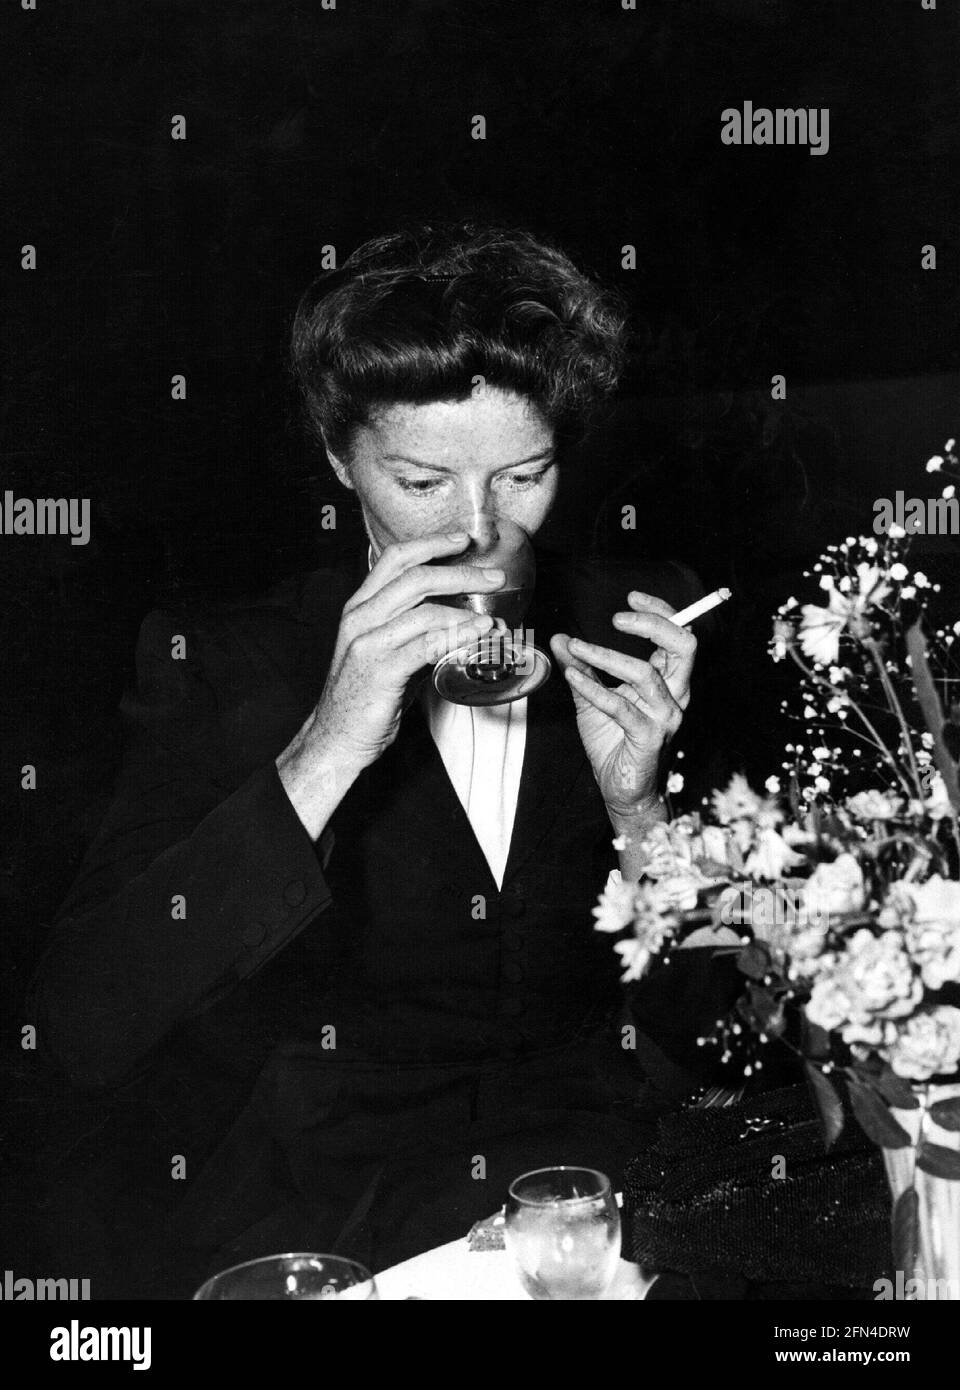 Hepburn, Katharine, 12.5.1907 - 29.06.2003, American actress, drinking, smoking, 1950s, drink, ADDITIONAL-RIGHTS-CLEARANCE-INFO-NOT-AVAILABLE Stock Photo